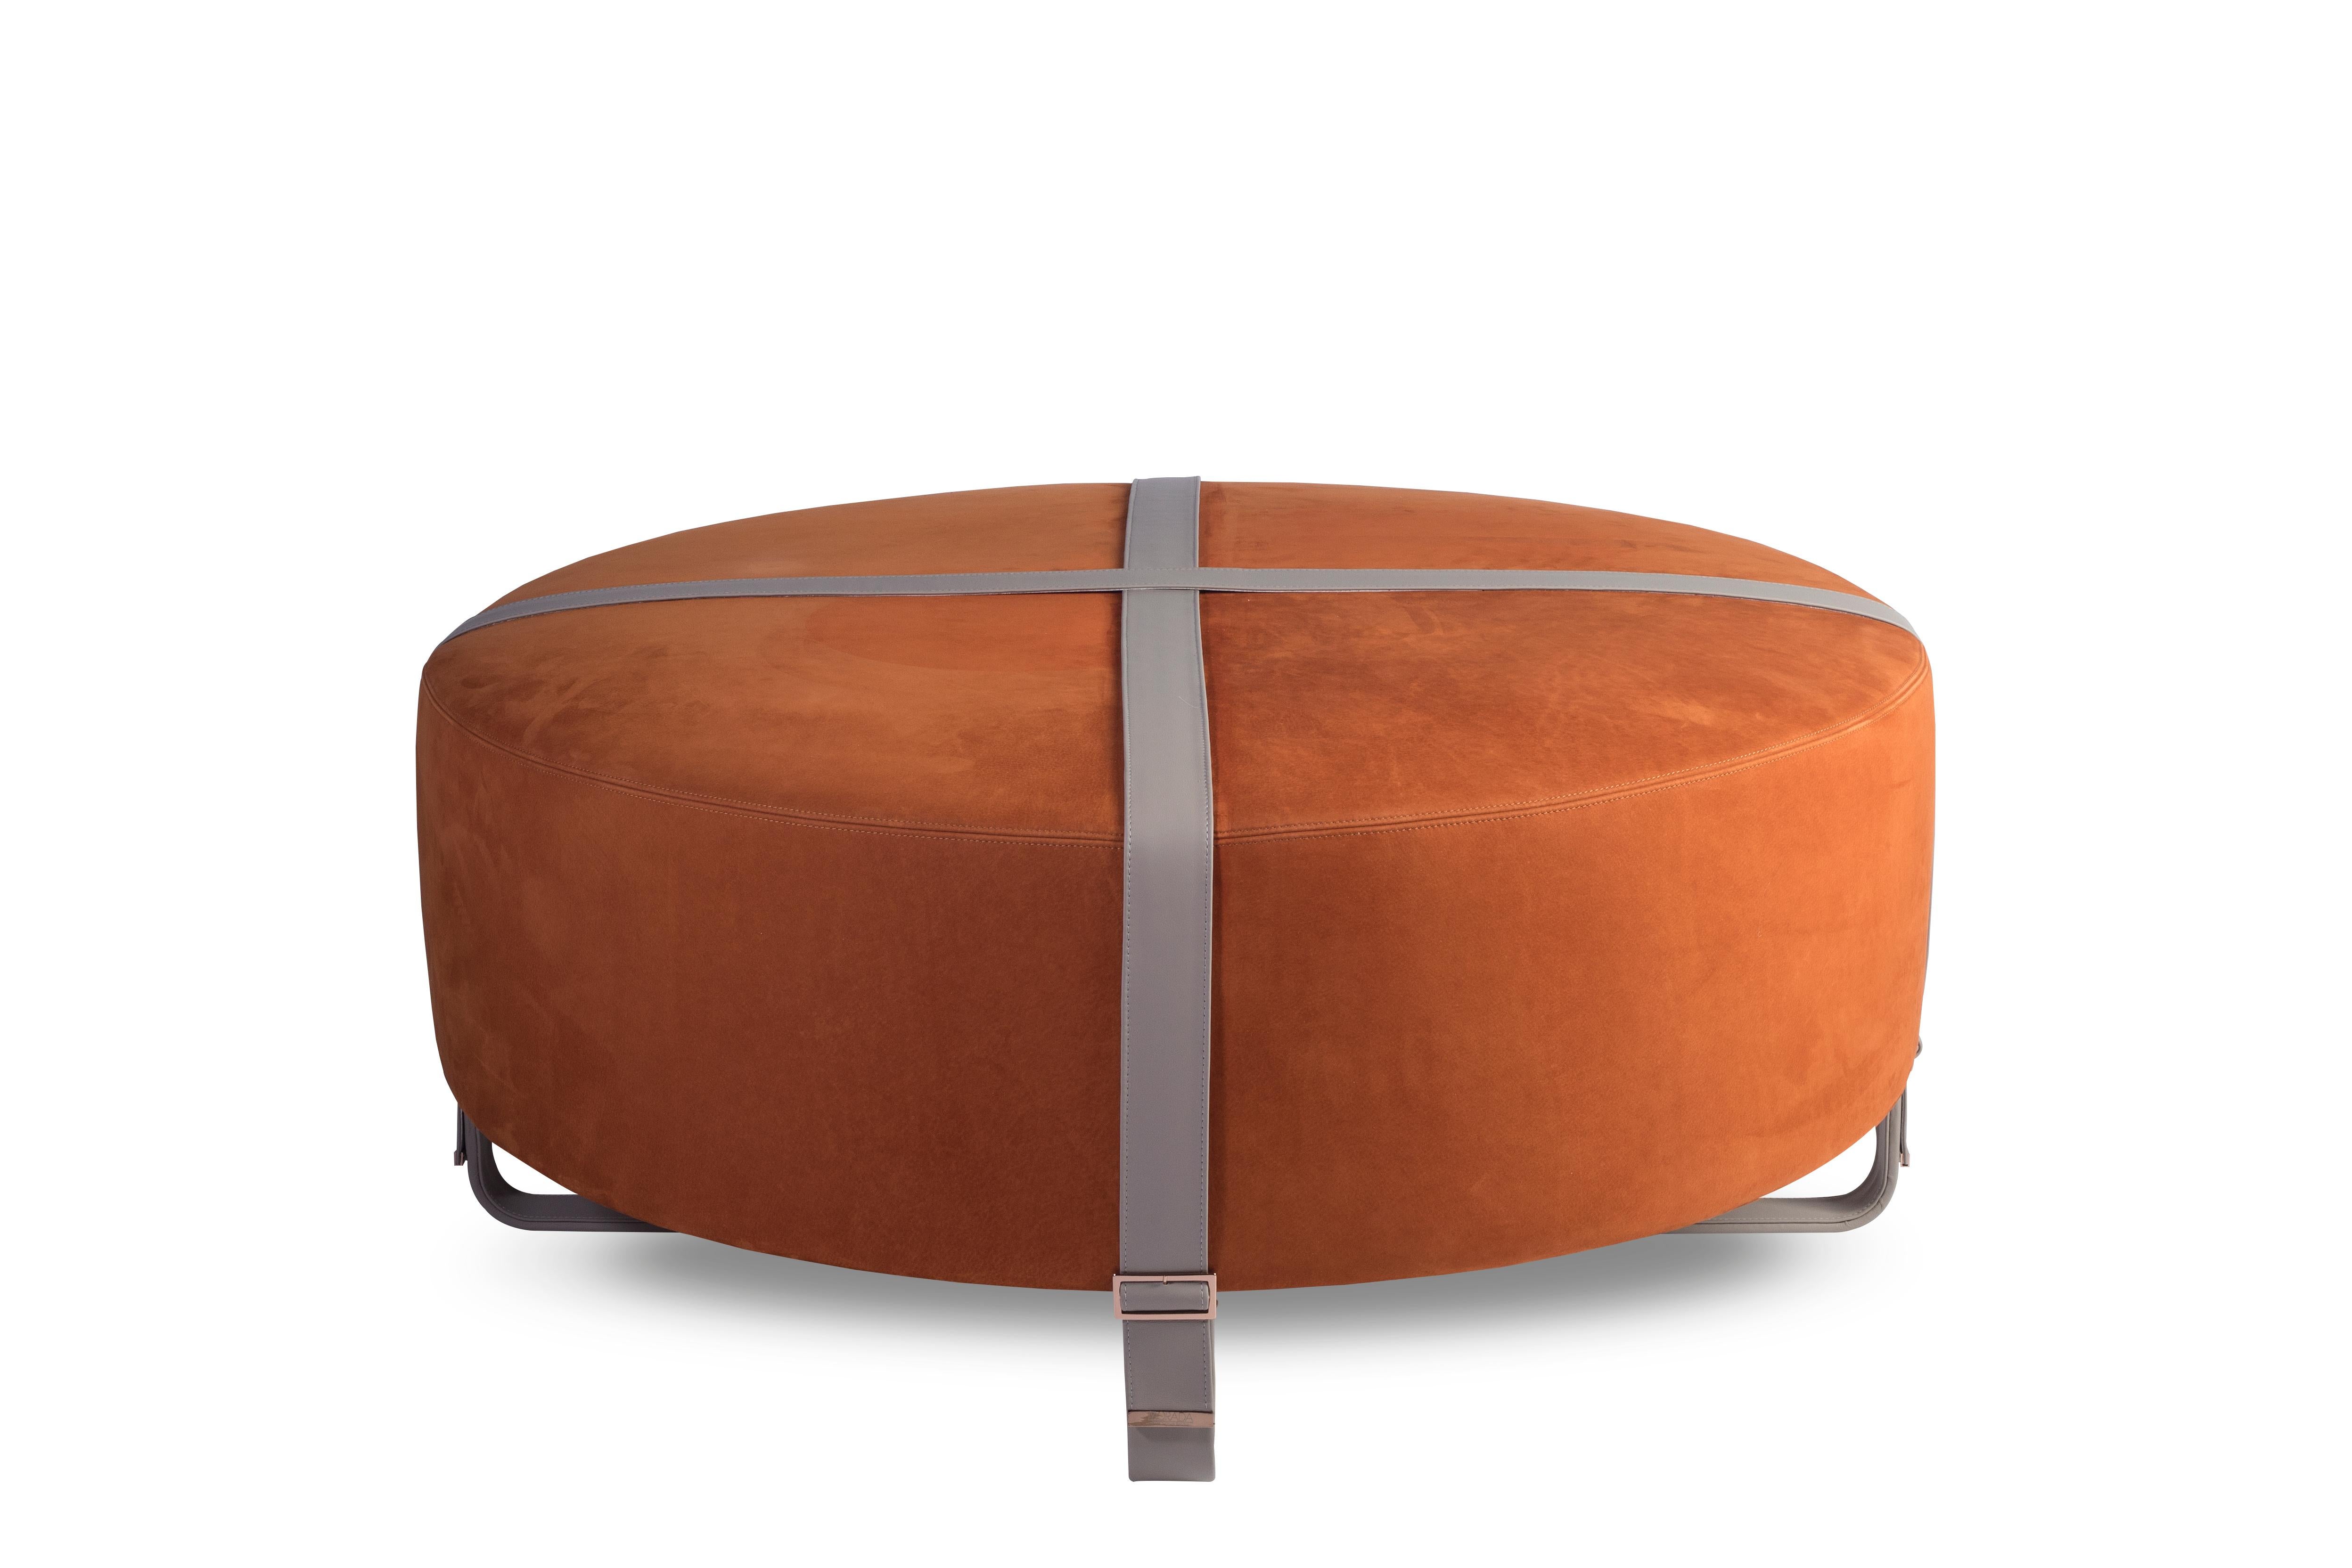 Italian Contemporary Round Leather Ottoman with Leather Belts For Sale